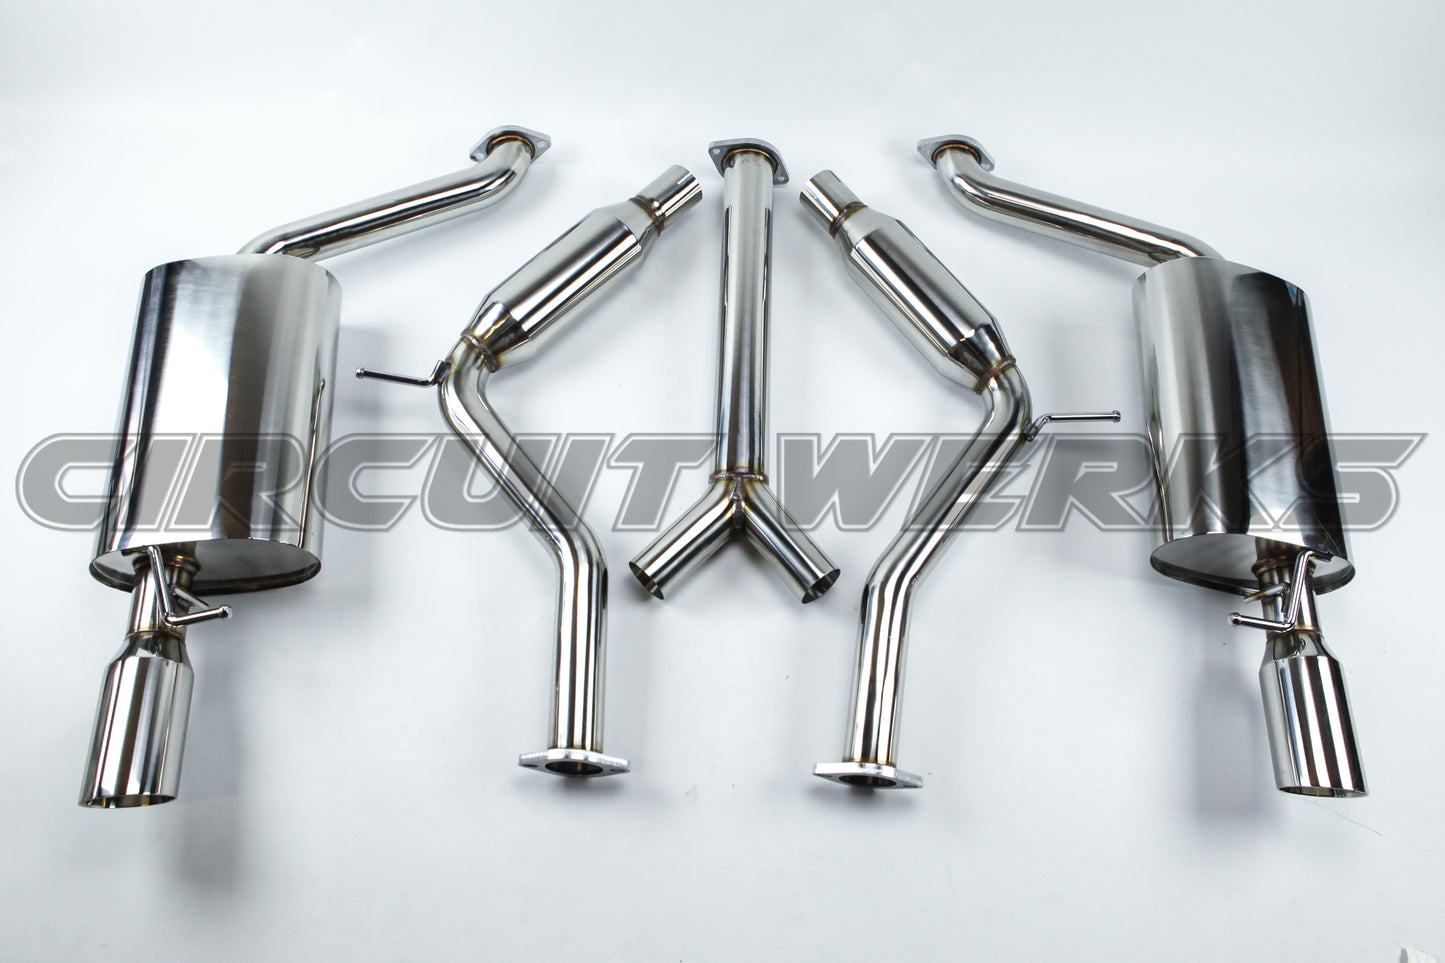 1992-2000 Lexus SC300 Thick Walled Catback Dual Exhaust System